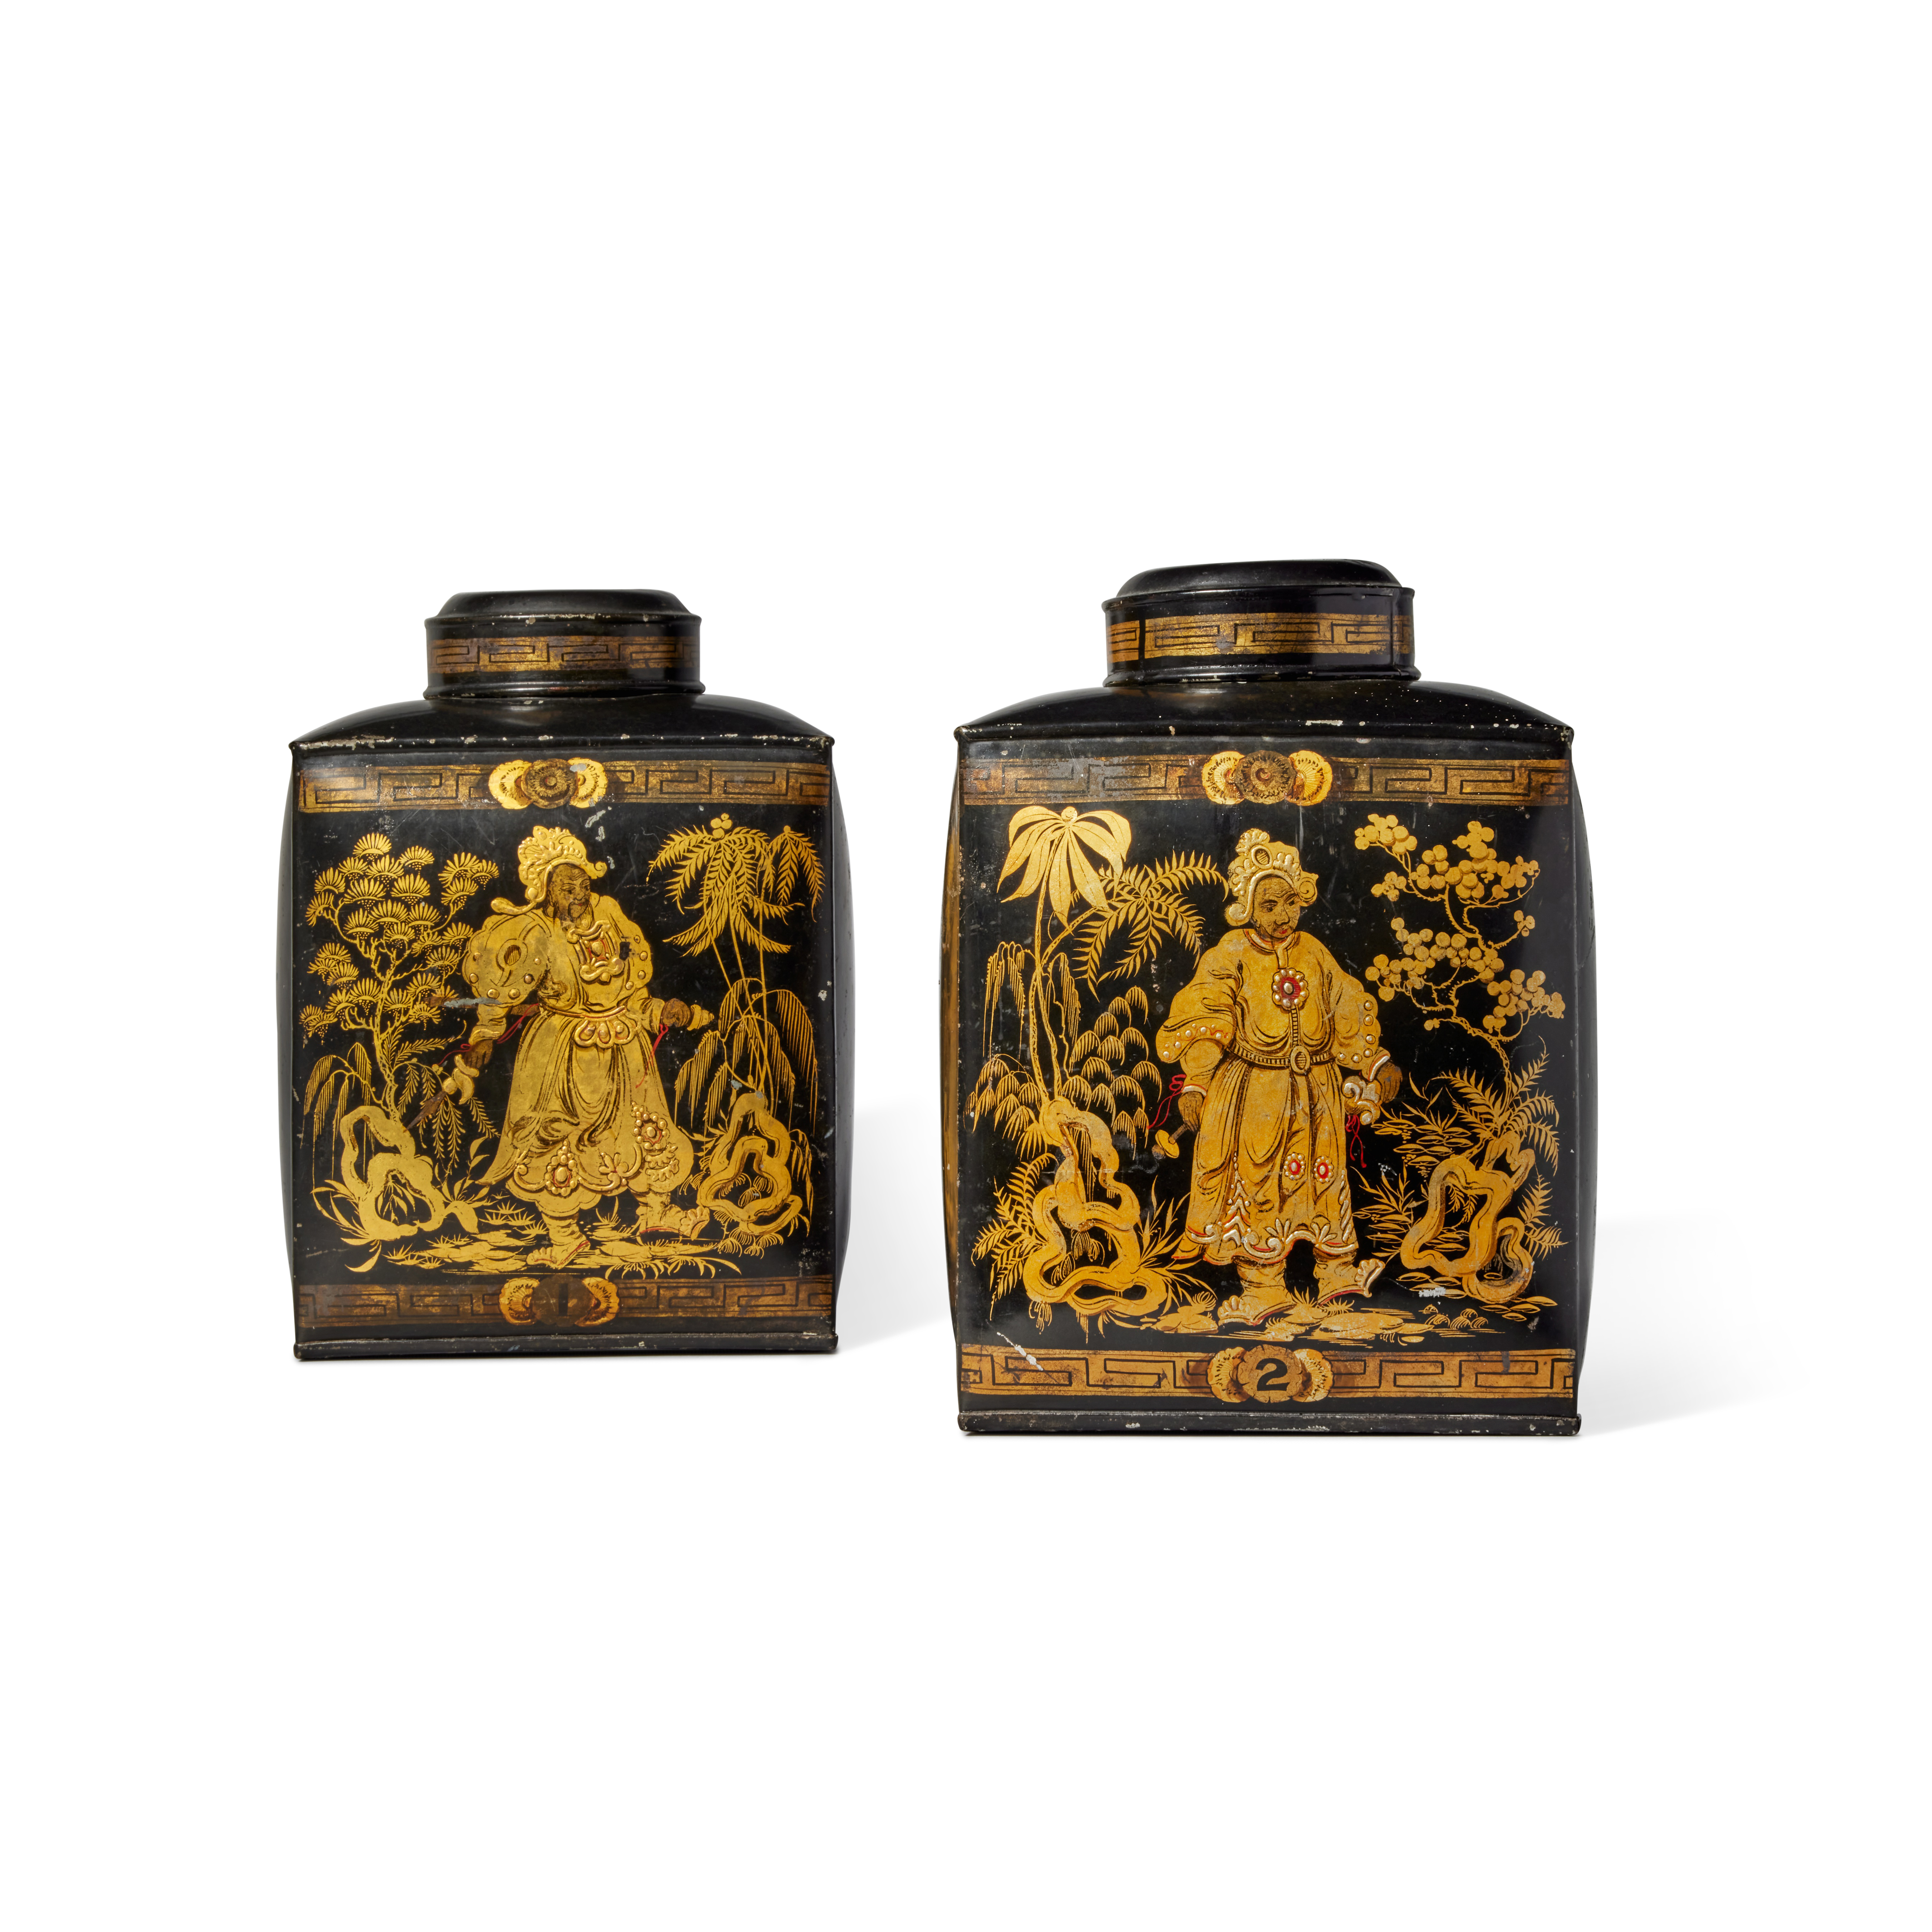 A Pair of Early Victorian Tôle Peinte Tea Canisters and Covers, Circa 1840 - Image 2 of 4